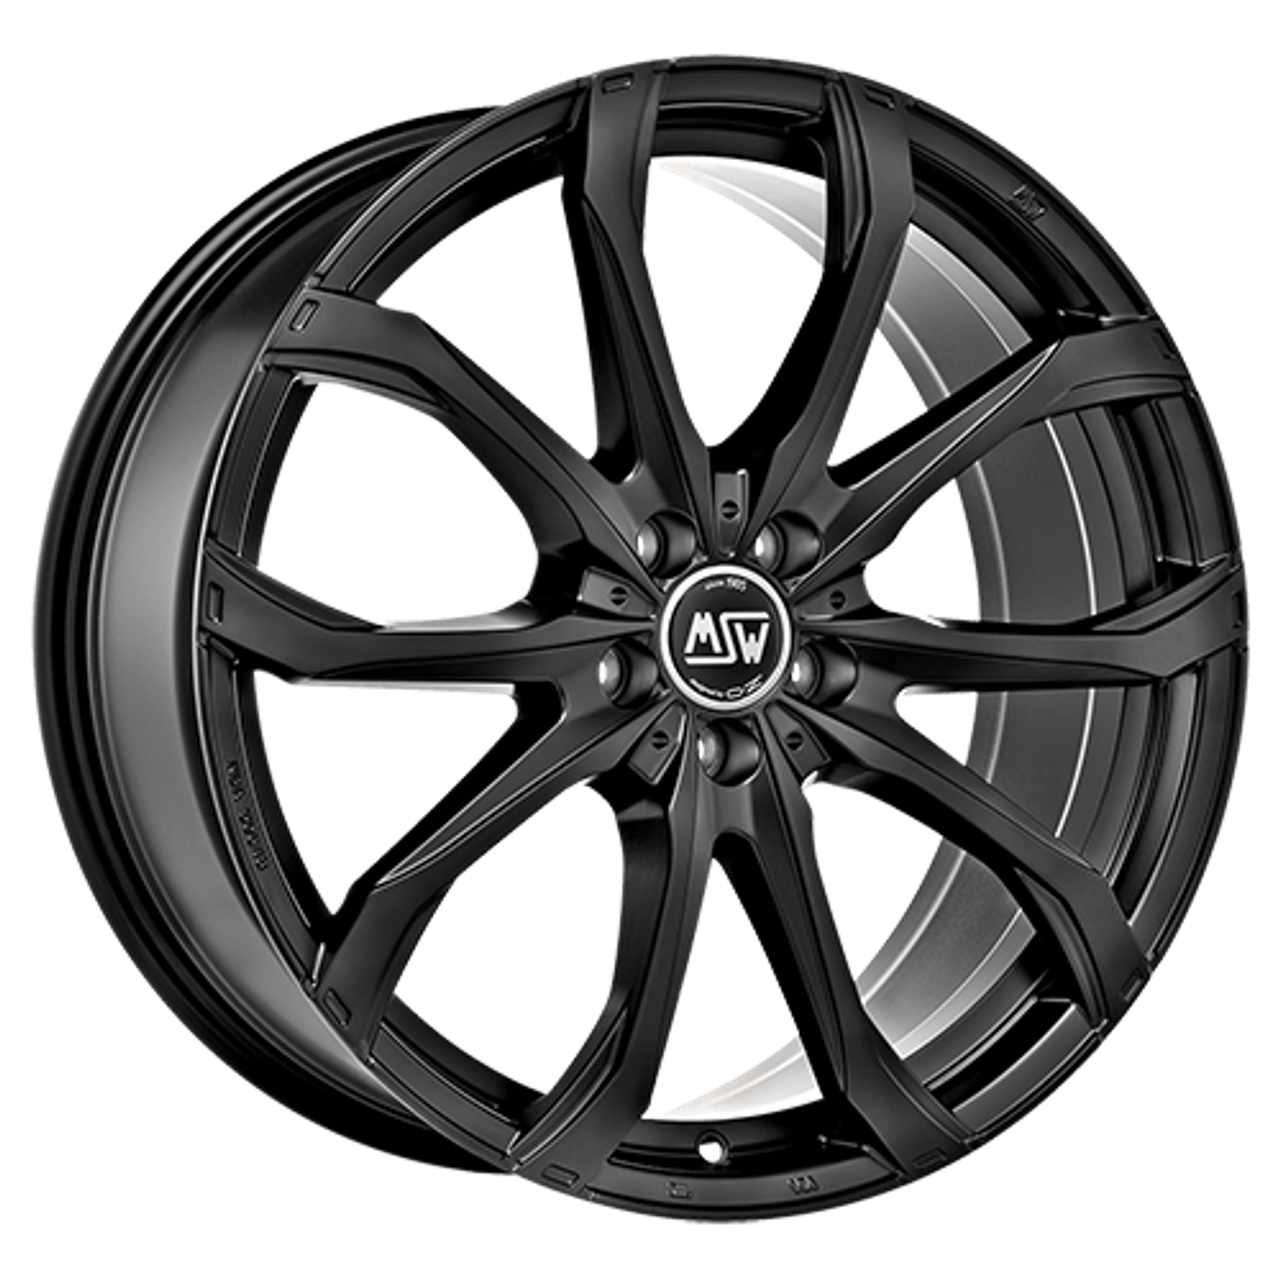 MSW (OZ) MSW 48 gloss black full polished 8.0Jx18 5x112 ET28